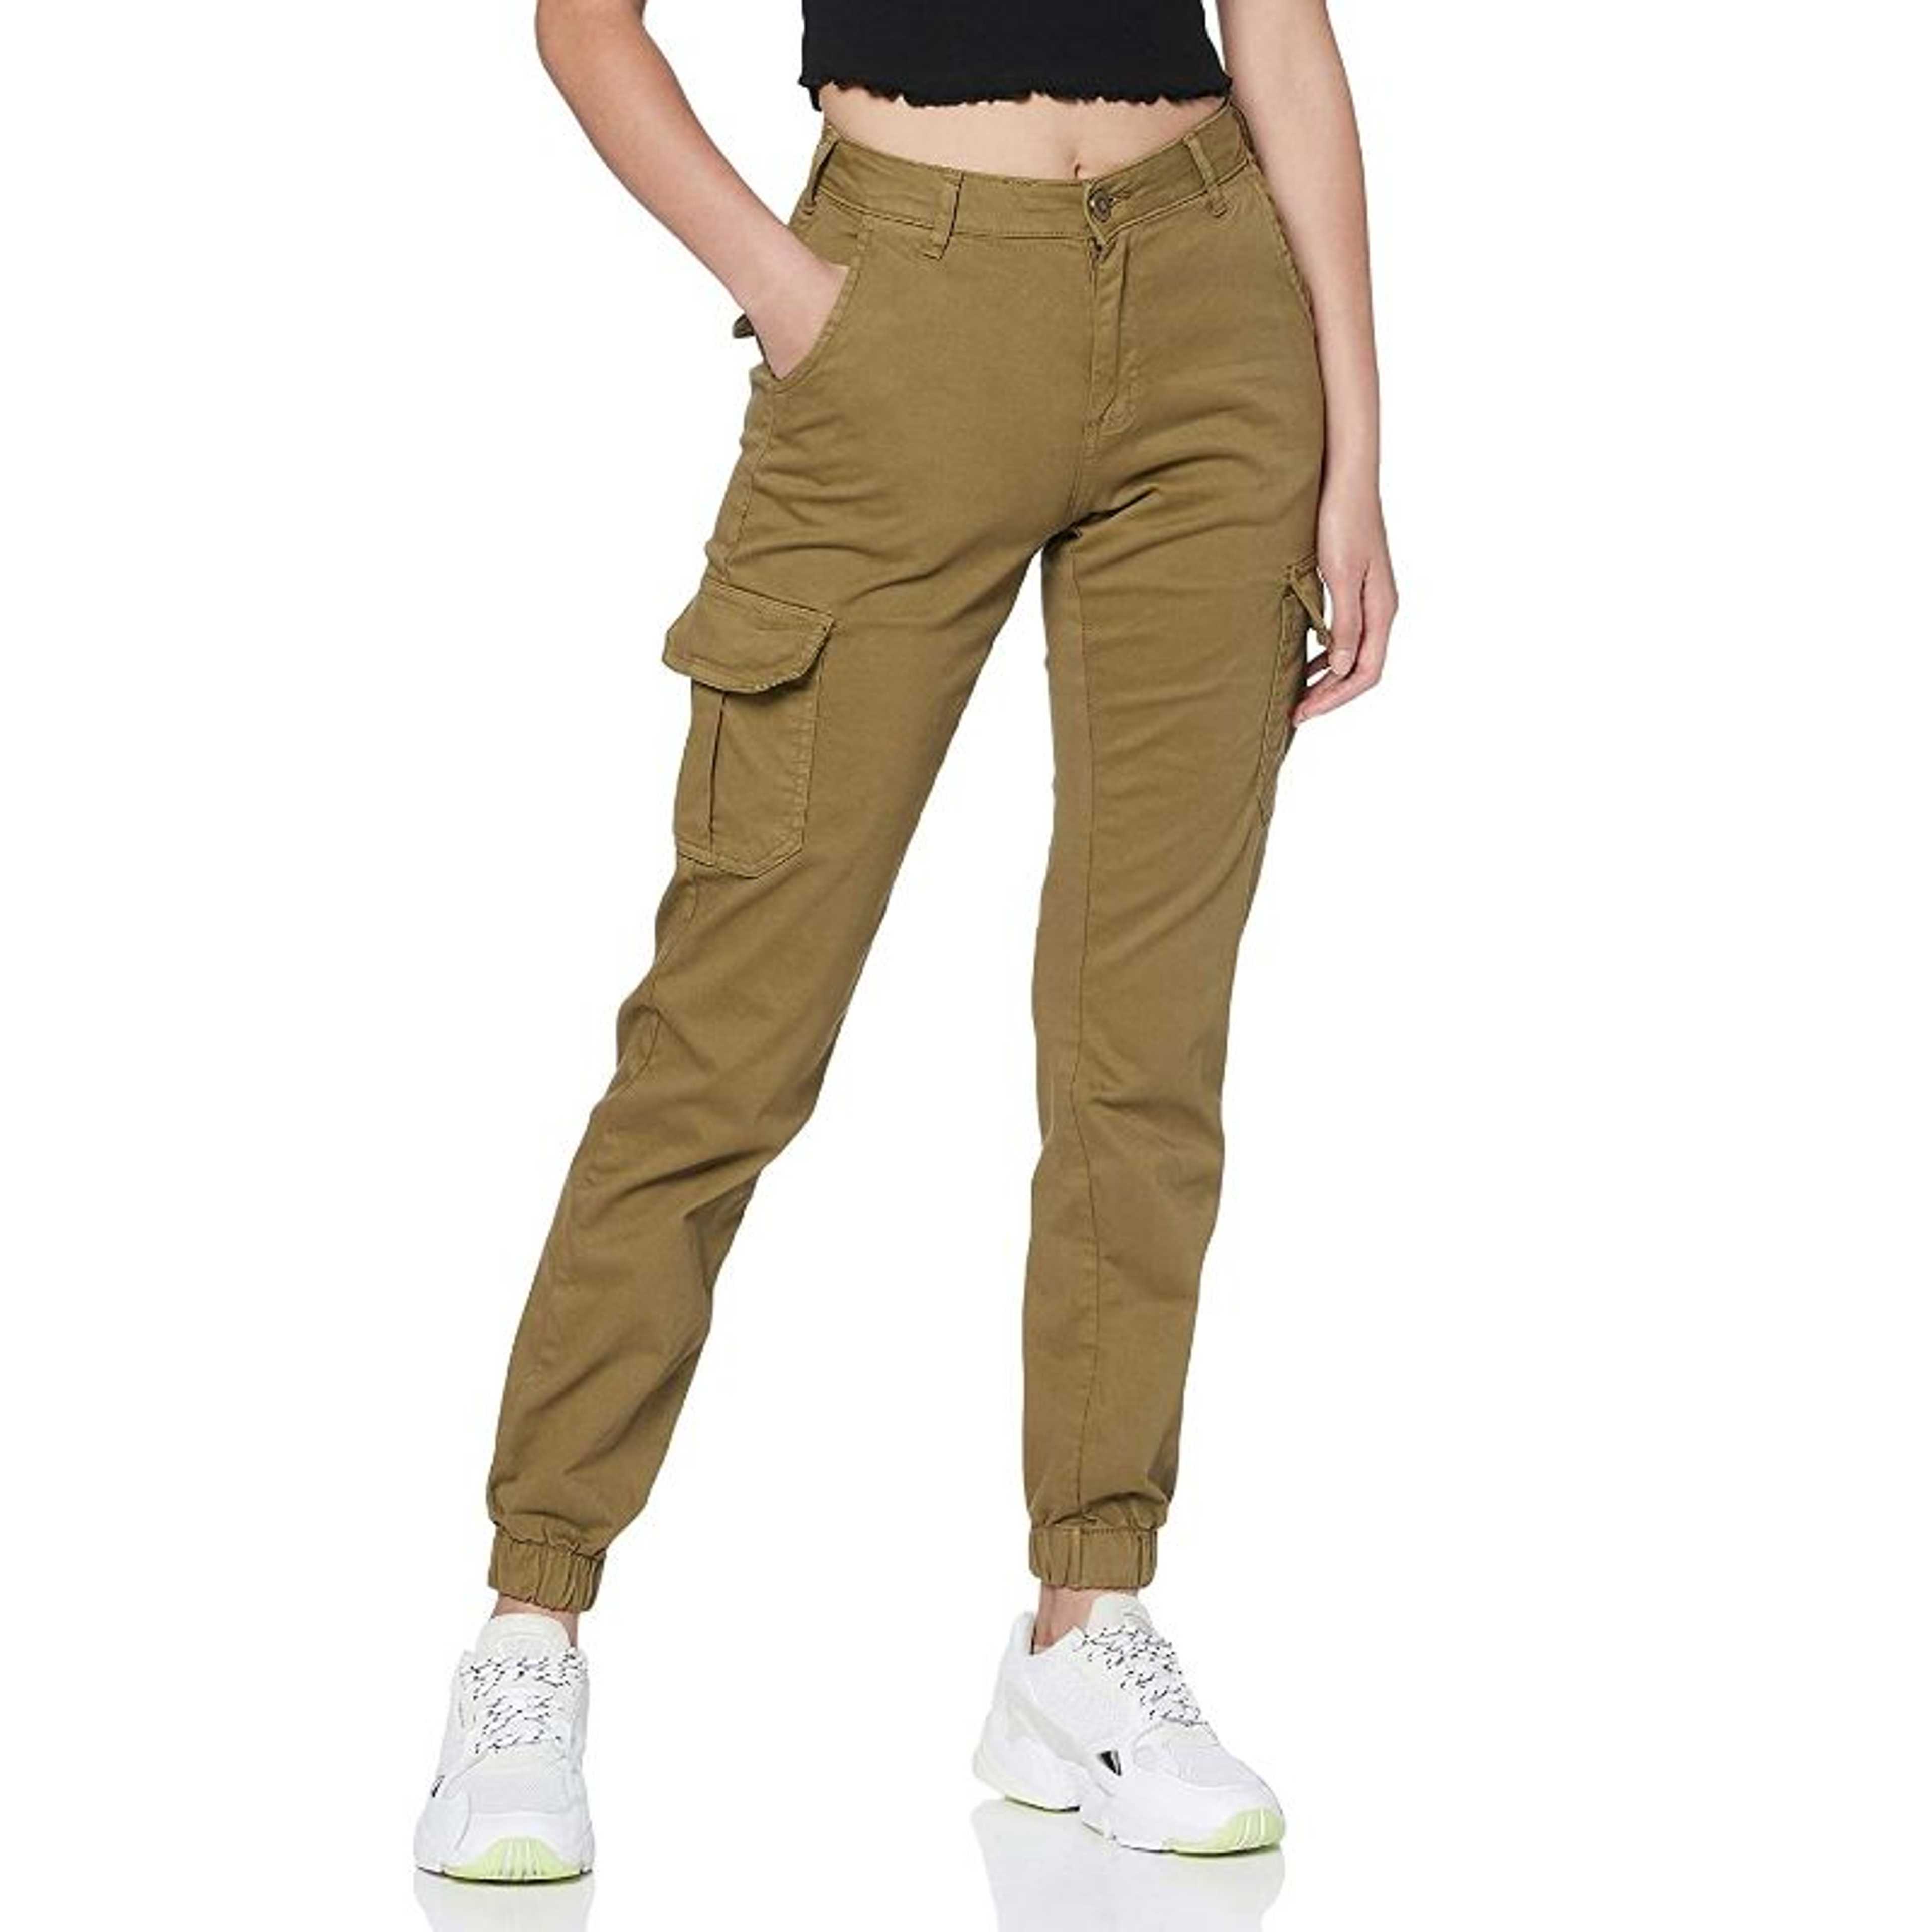 Brown Rubahas Womens Cargo Trousers Ladies Trousers Jeans Pants